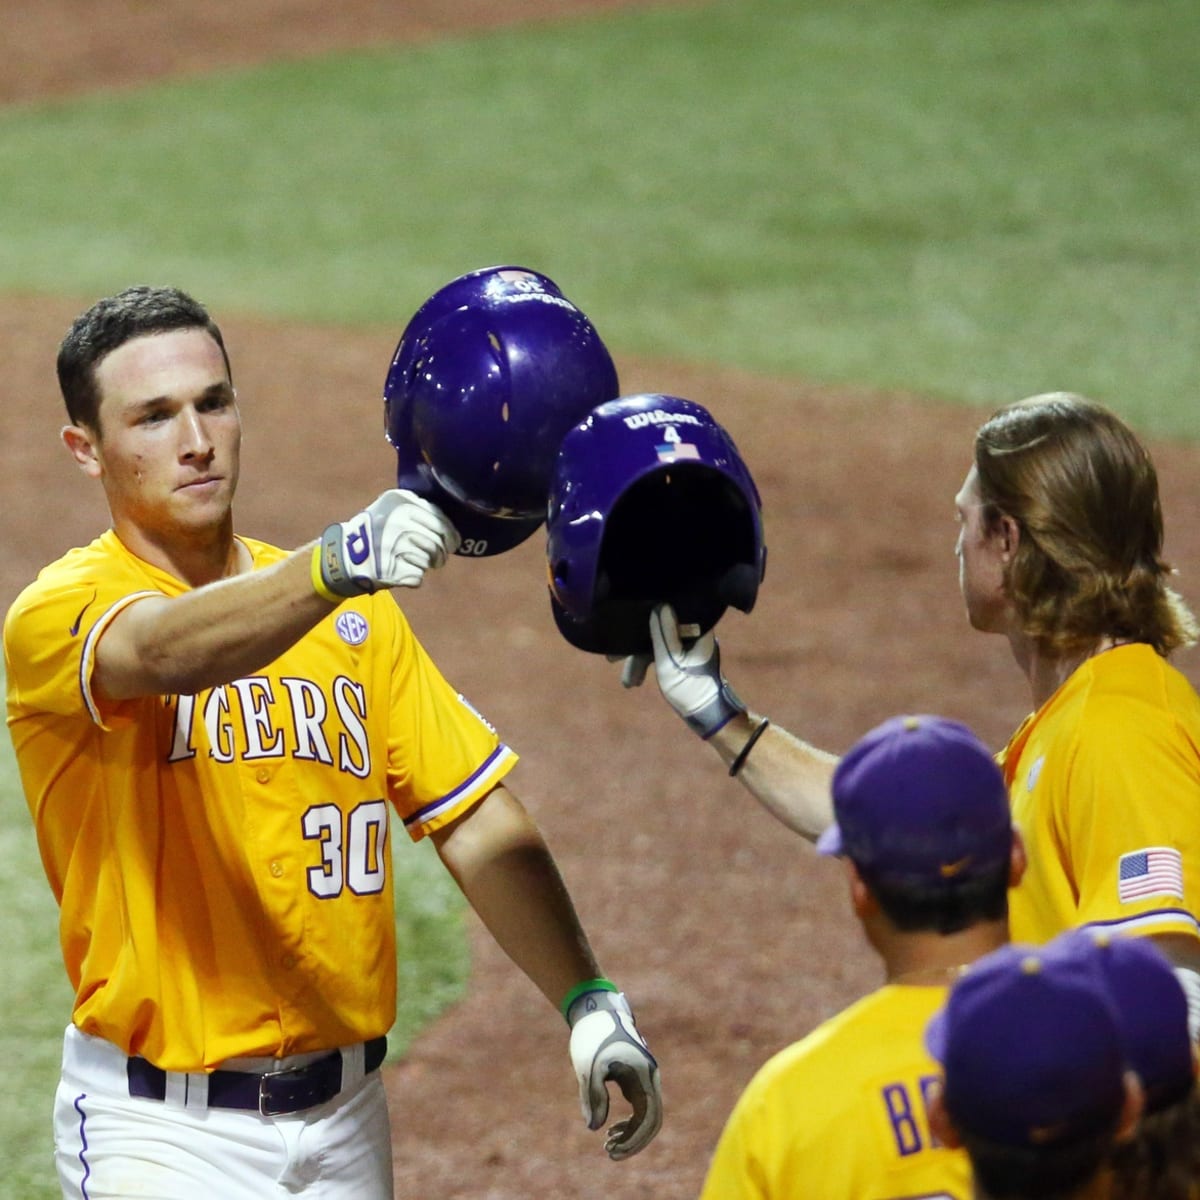 Astros prospect Bregman relishes work ethic honed at LSU